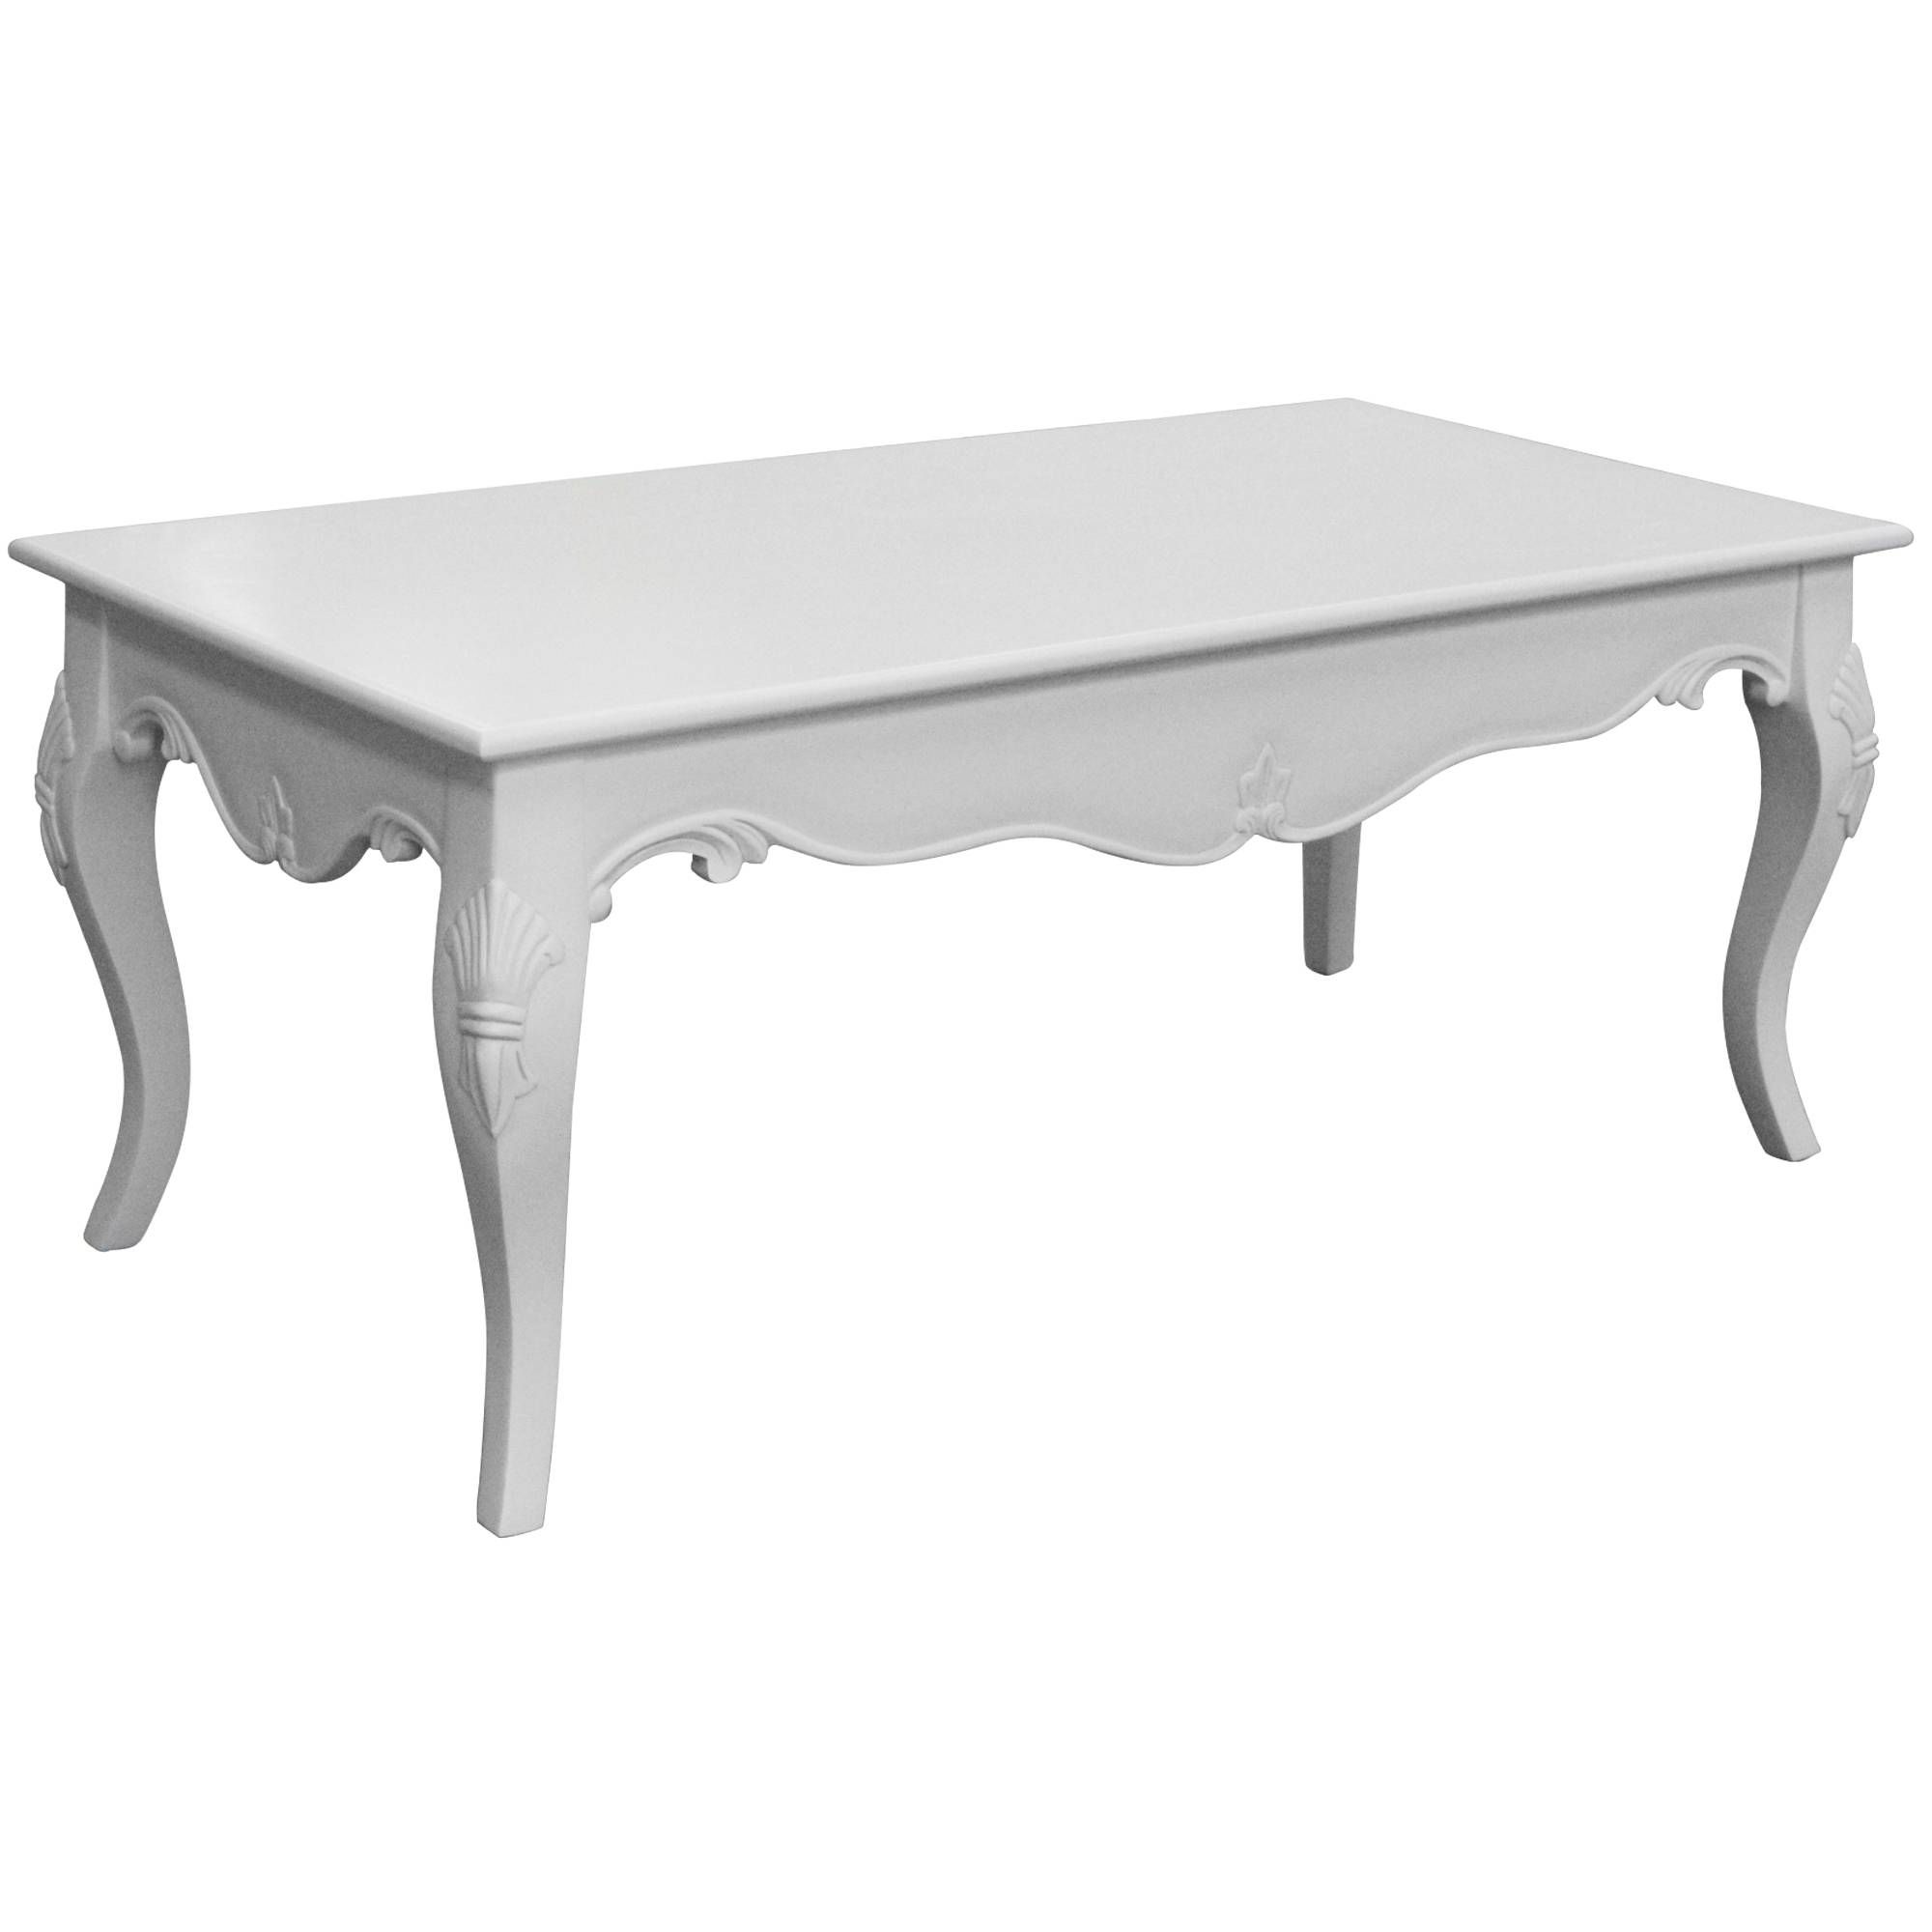 Antique French Style Coffee Table | French Furniture Range Inside French Style Coffee Tables (View 28 of 30)